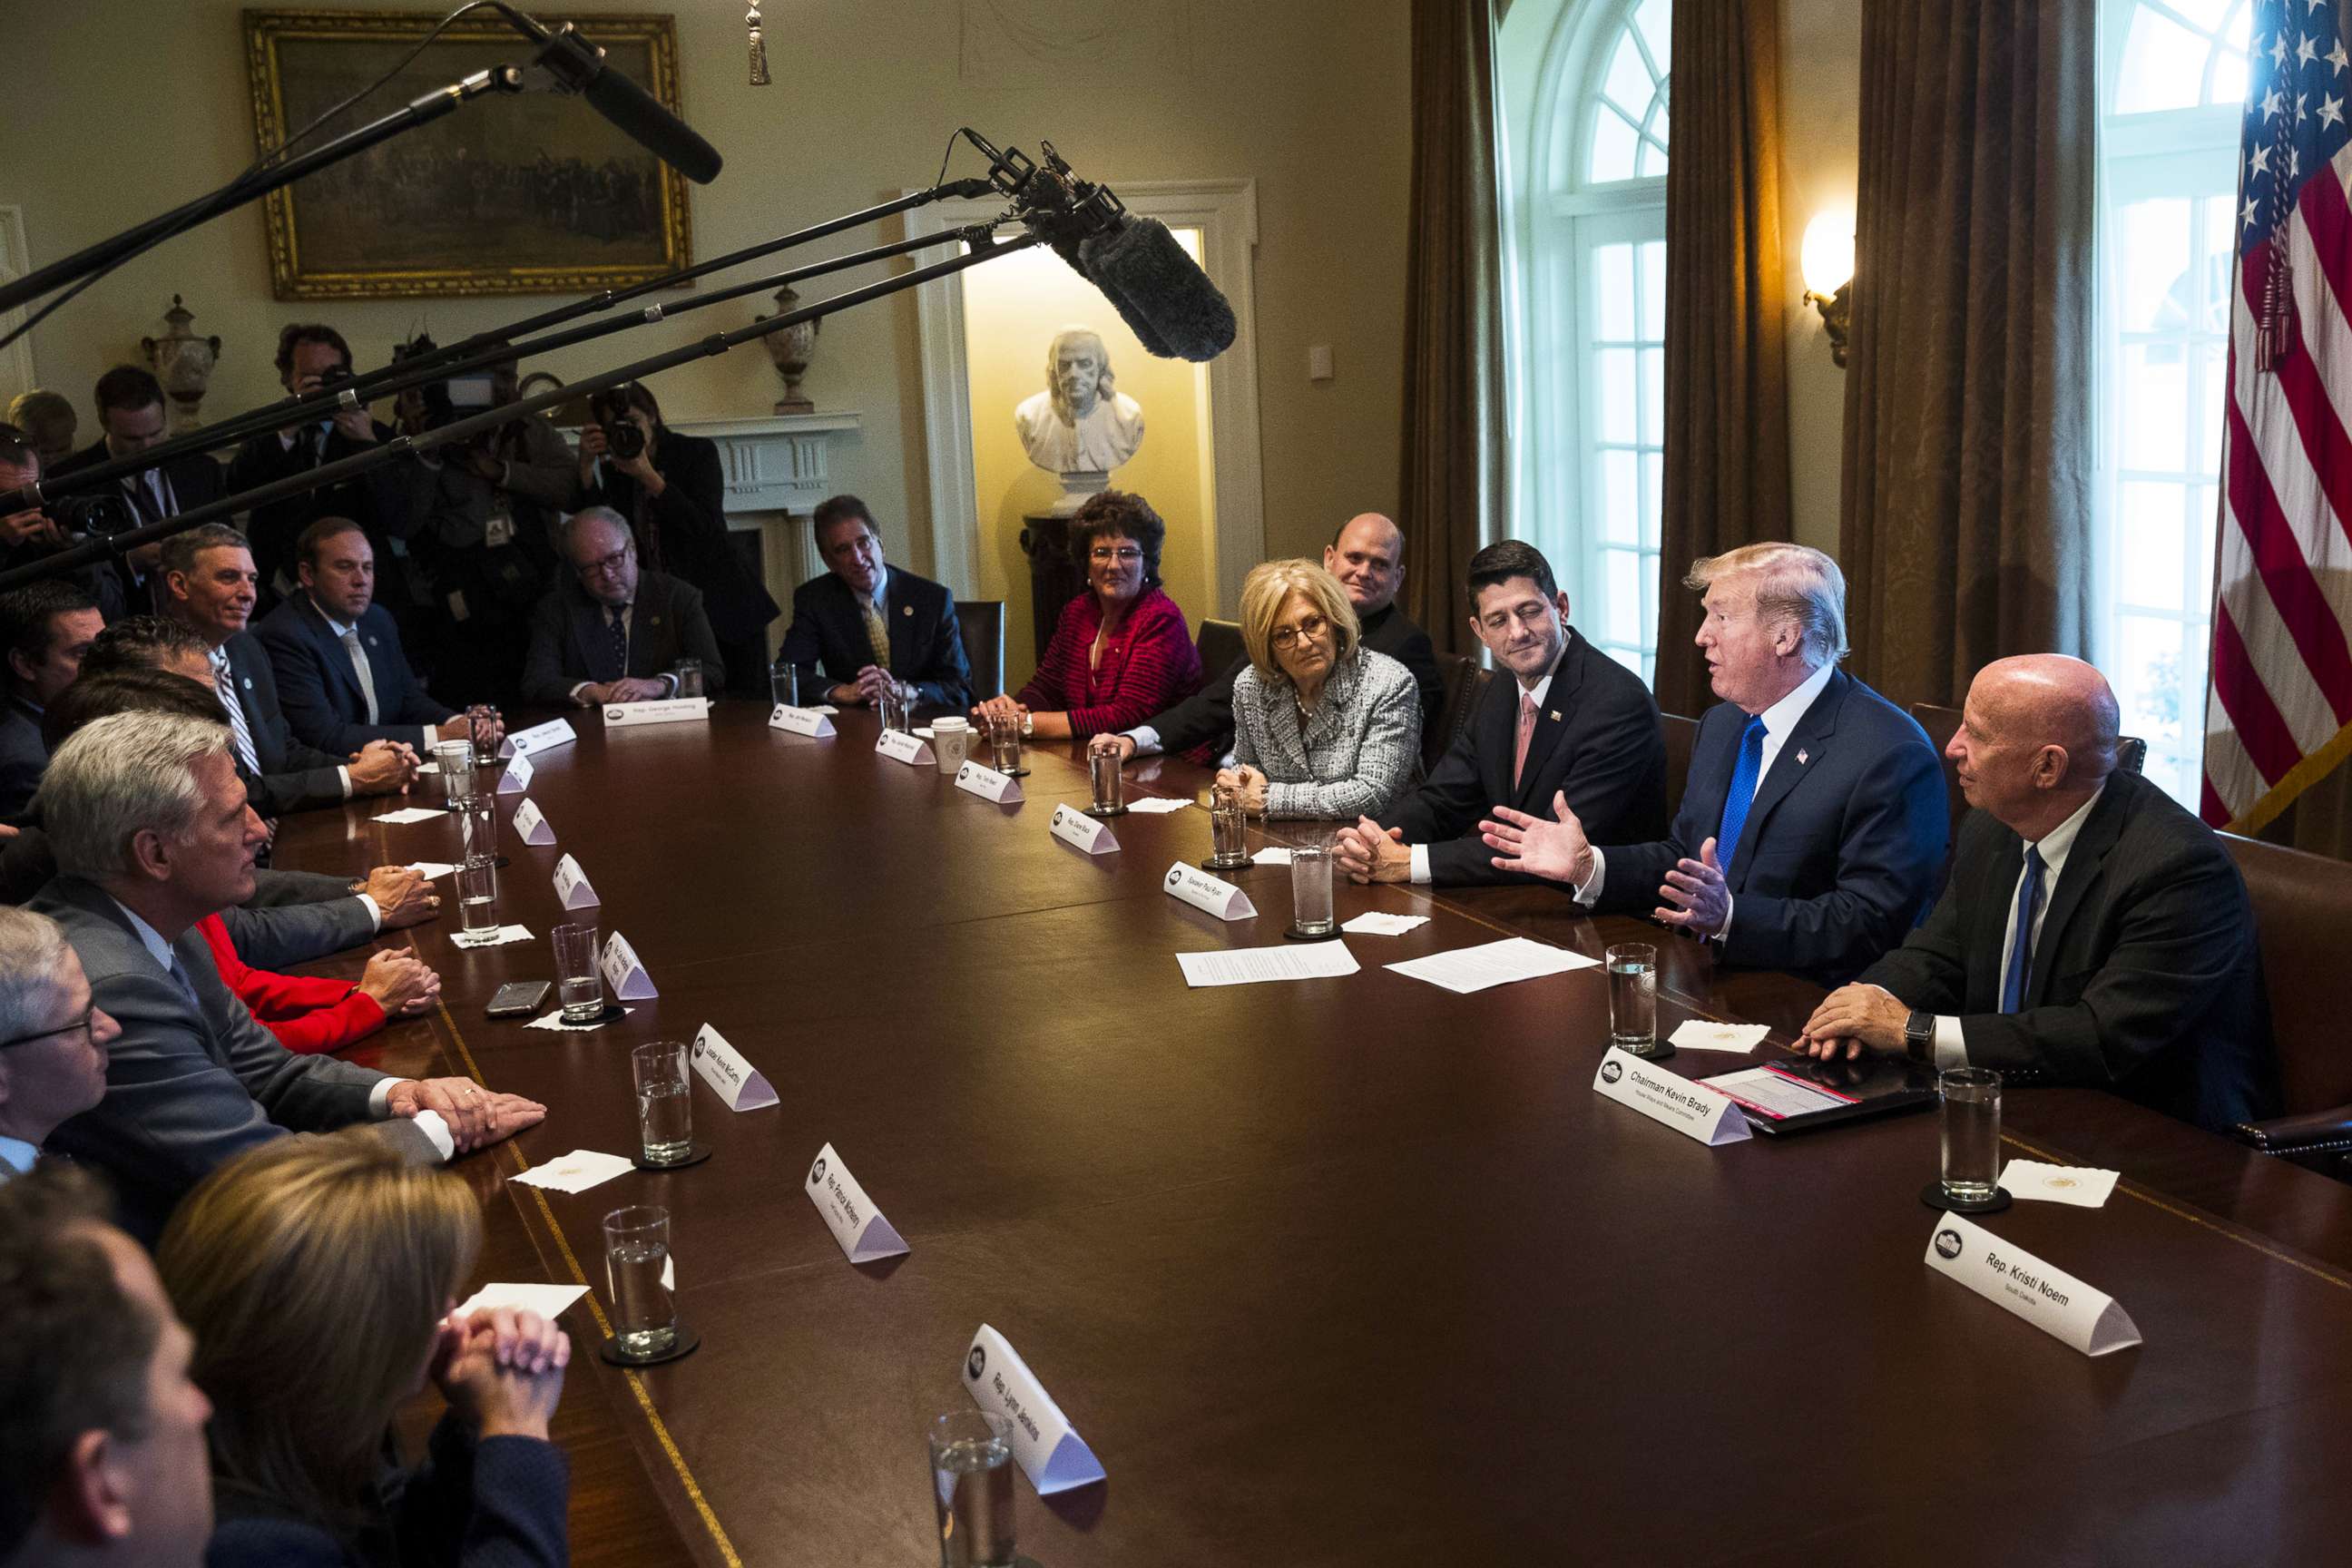 PHOTO: President Donald Trump speaks about tax reform legislation during a meeting with members of the House Ways and Means Committee in the Cabinet Room at the White House, Nov. 2, 2017.